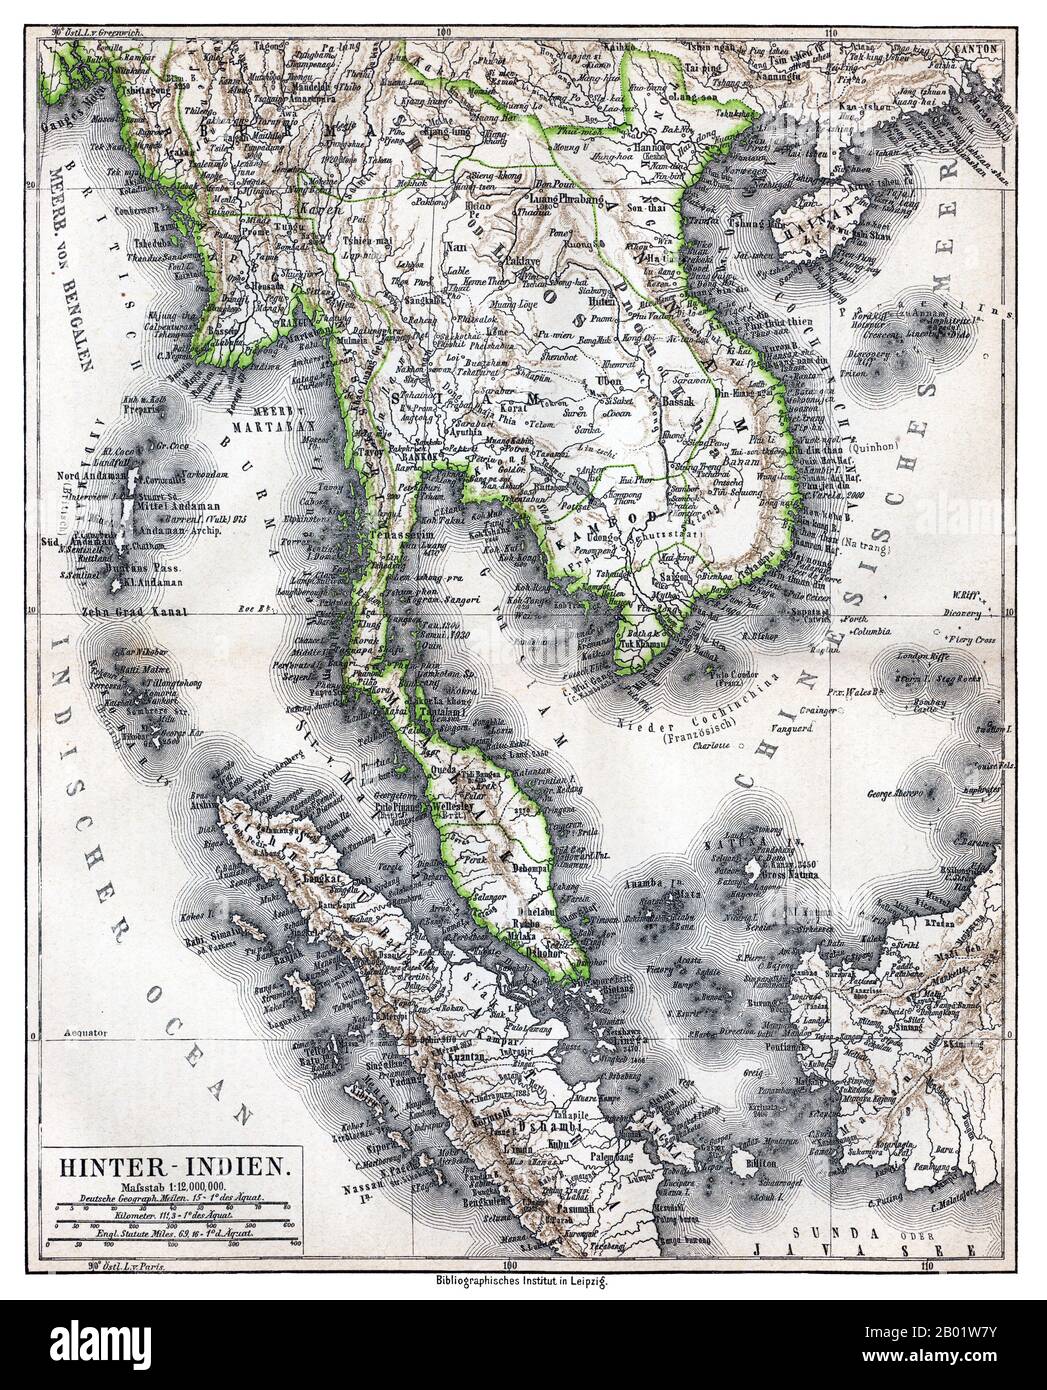 Southeast Asia: 'Hinter-Indien' ('Further India'), a map of Greater Indochina and the western part of the Malay-Indonesian Archipelago, Bibliographisches Institut in Leipzig, Germany, 1876.  Physical map showing approximate political frontiers in Green. The Shan and Lao states are shown independent of (or tributary to) Siam. Chiang Mai ('Tshien-Mai'and Luang Prabang are both shown lying within the frontiers of a greater Siam,, but the territoryy of Chiang Mai extends further to the northwest, into Burma's Shan State, beyond the Salween River, than it does today. Stock Photo